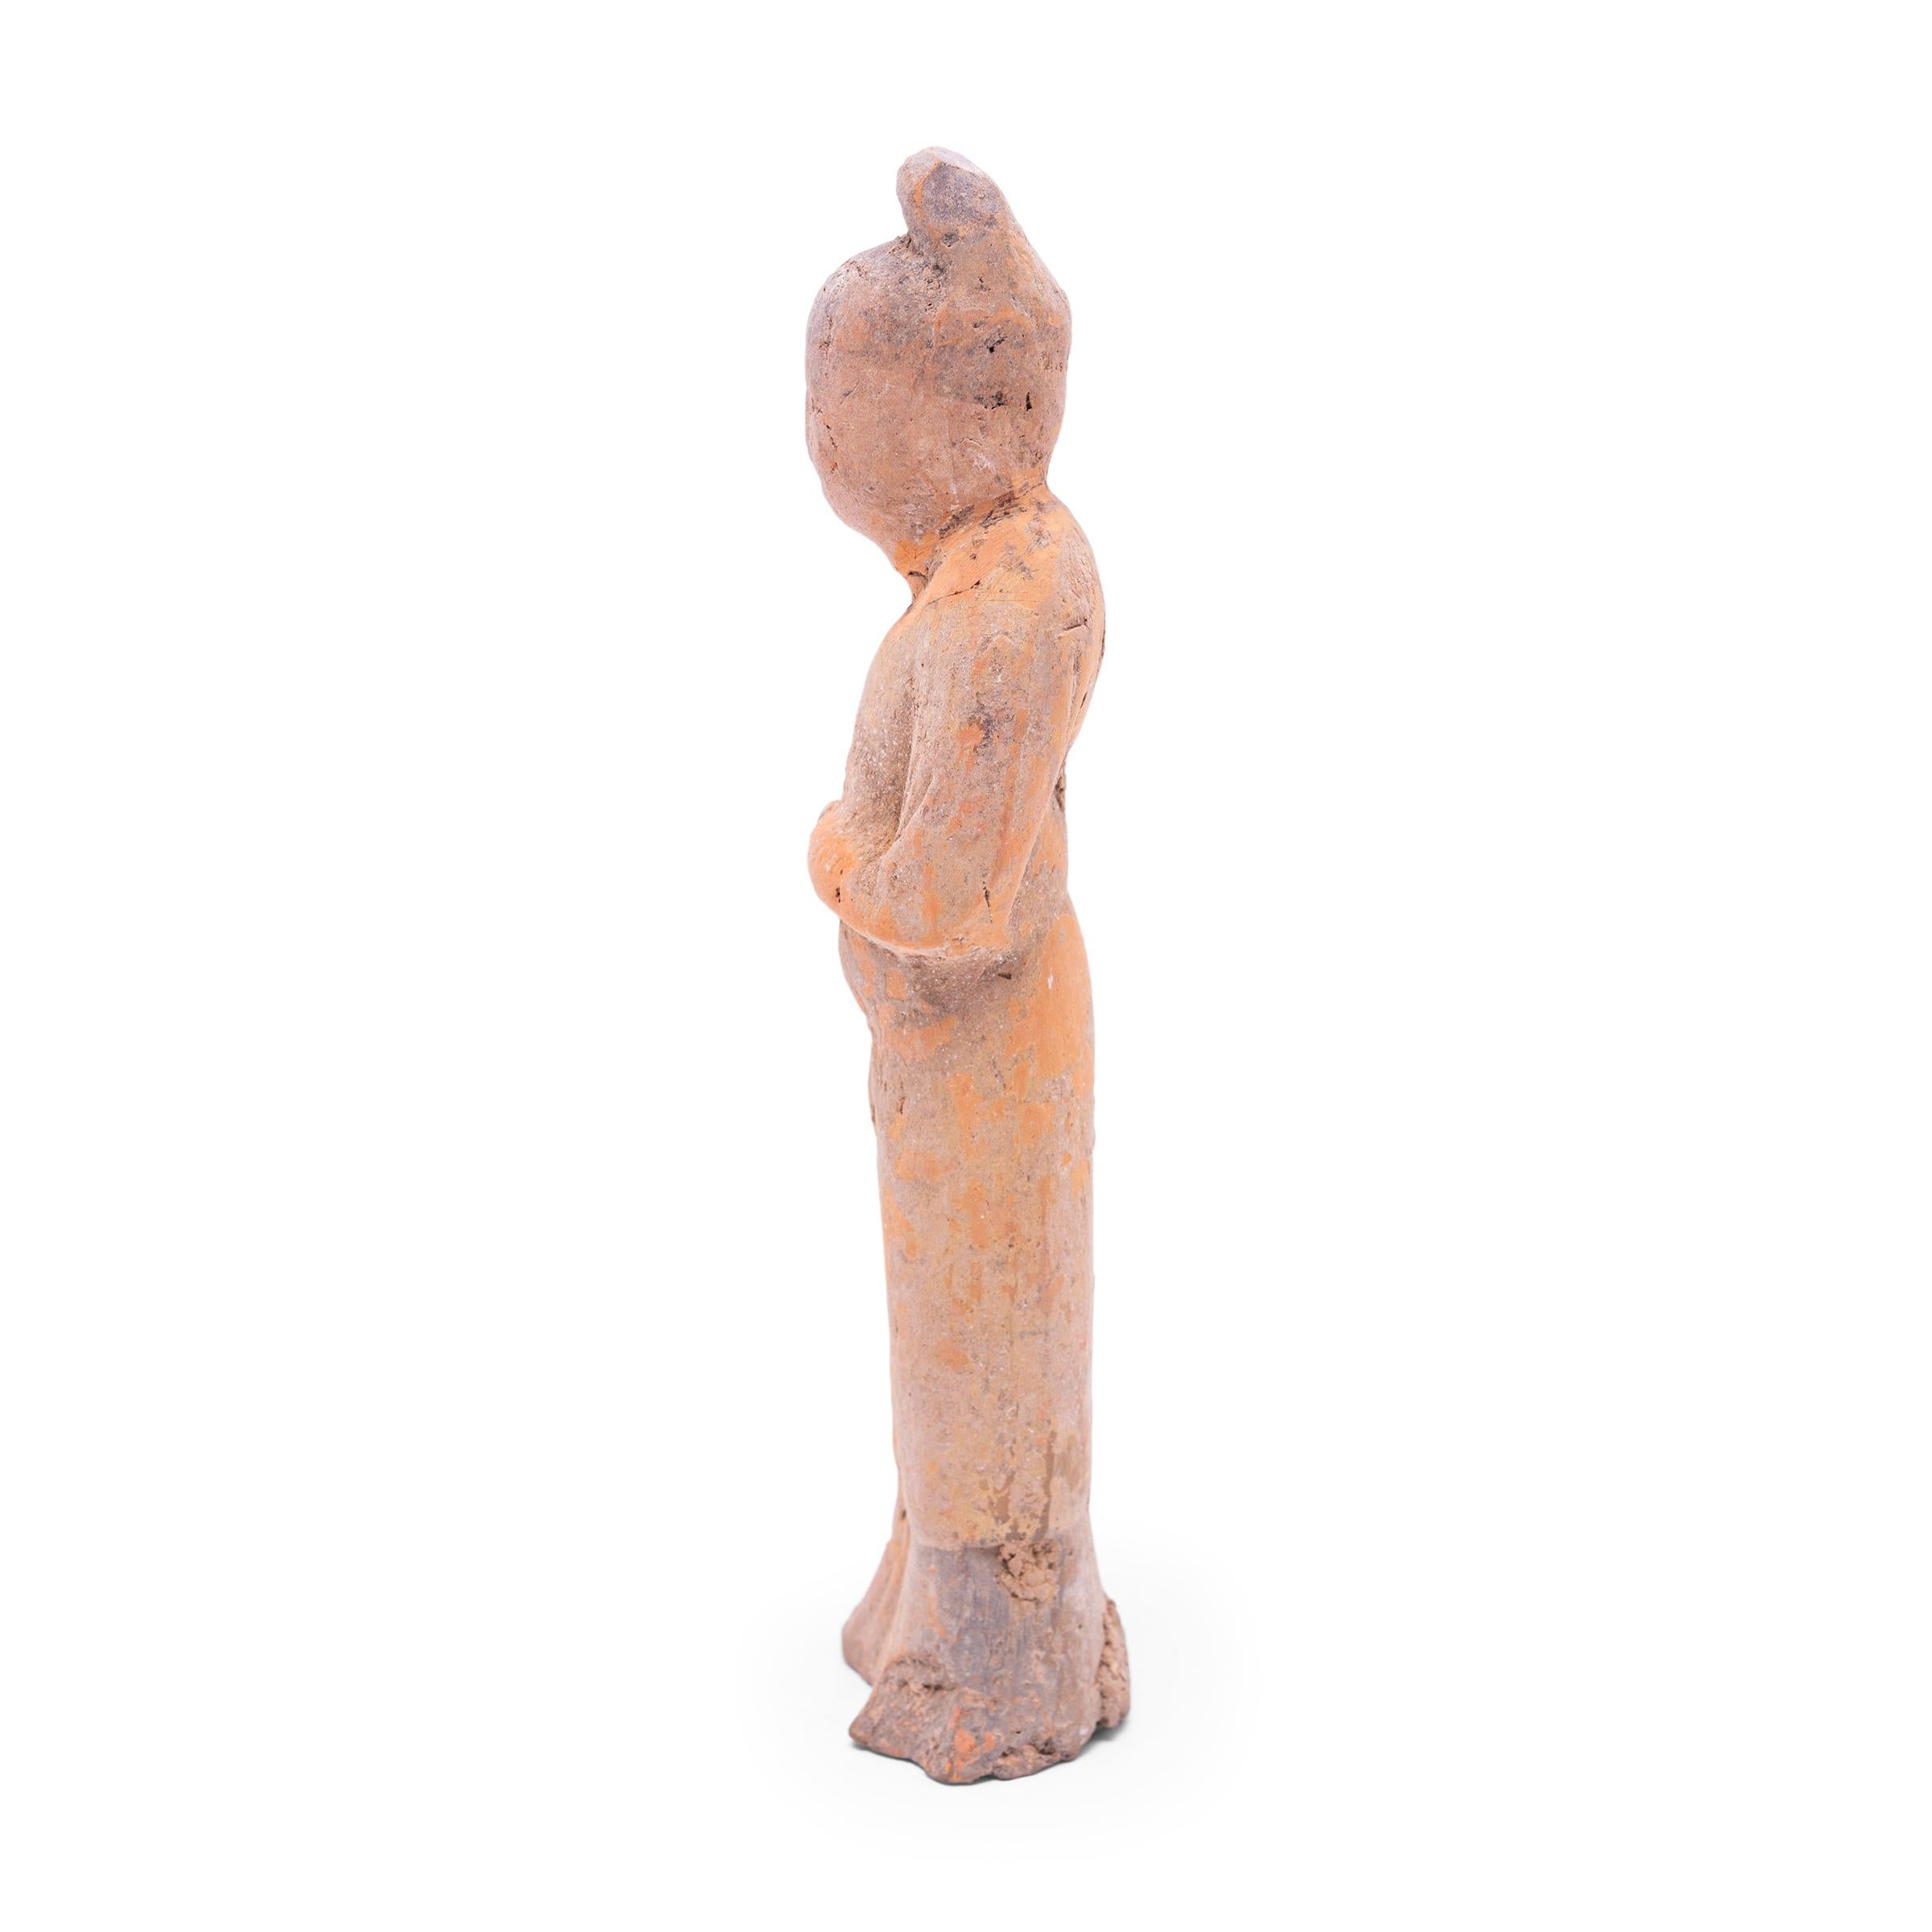 Molded of earthenware, this petite sculpture is a type of centuries-old burial figurine known as míngqì. Such model figures were placed in tombs of individuals with high status to ensure a safe journey to the afterlife. Meant to depict the pleasures